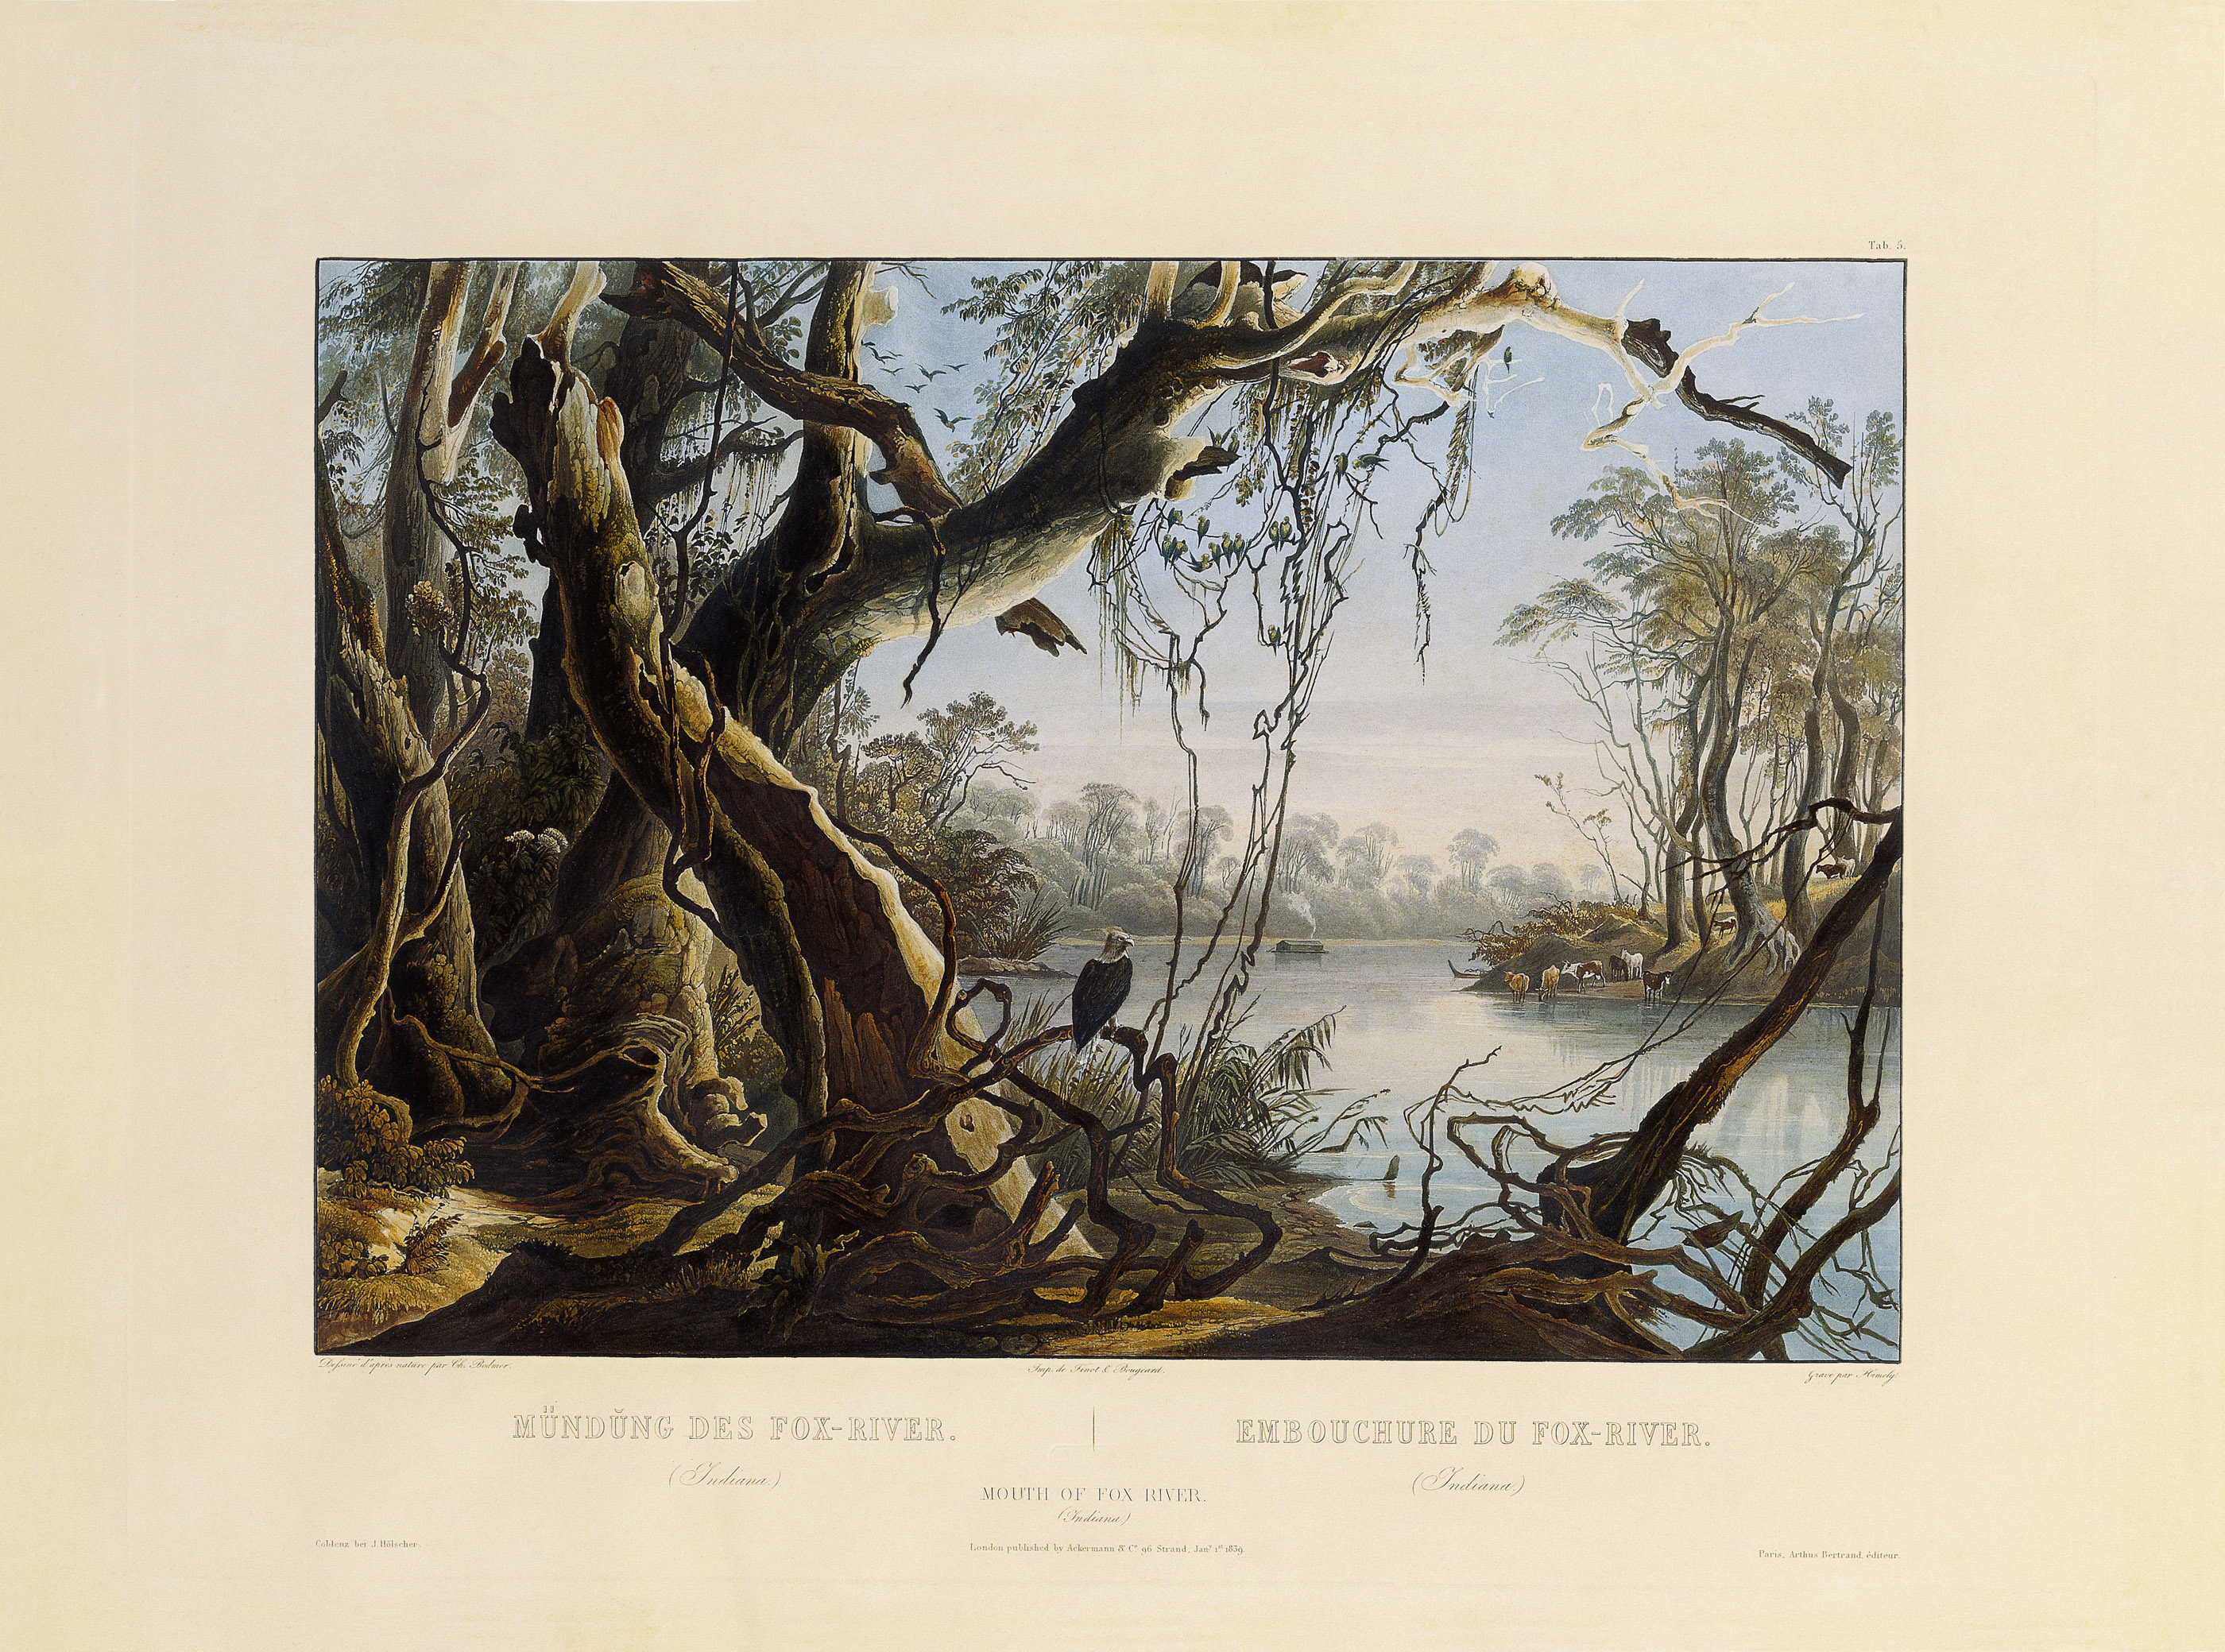 Tableau 5 Mouth of Fox River (Indiana) by Karl Bodmer